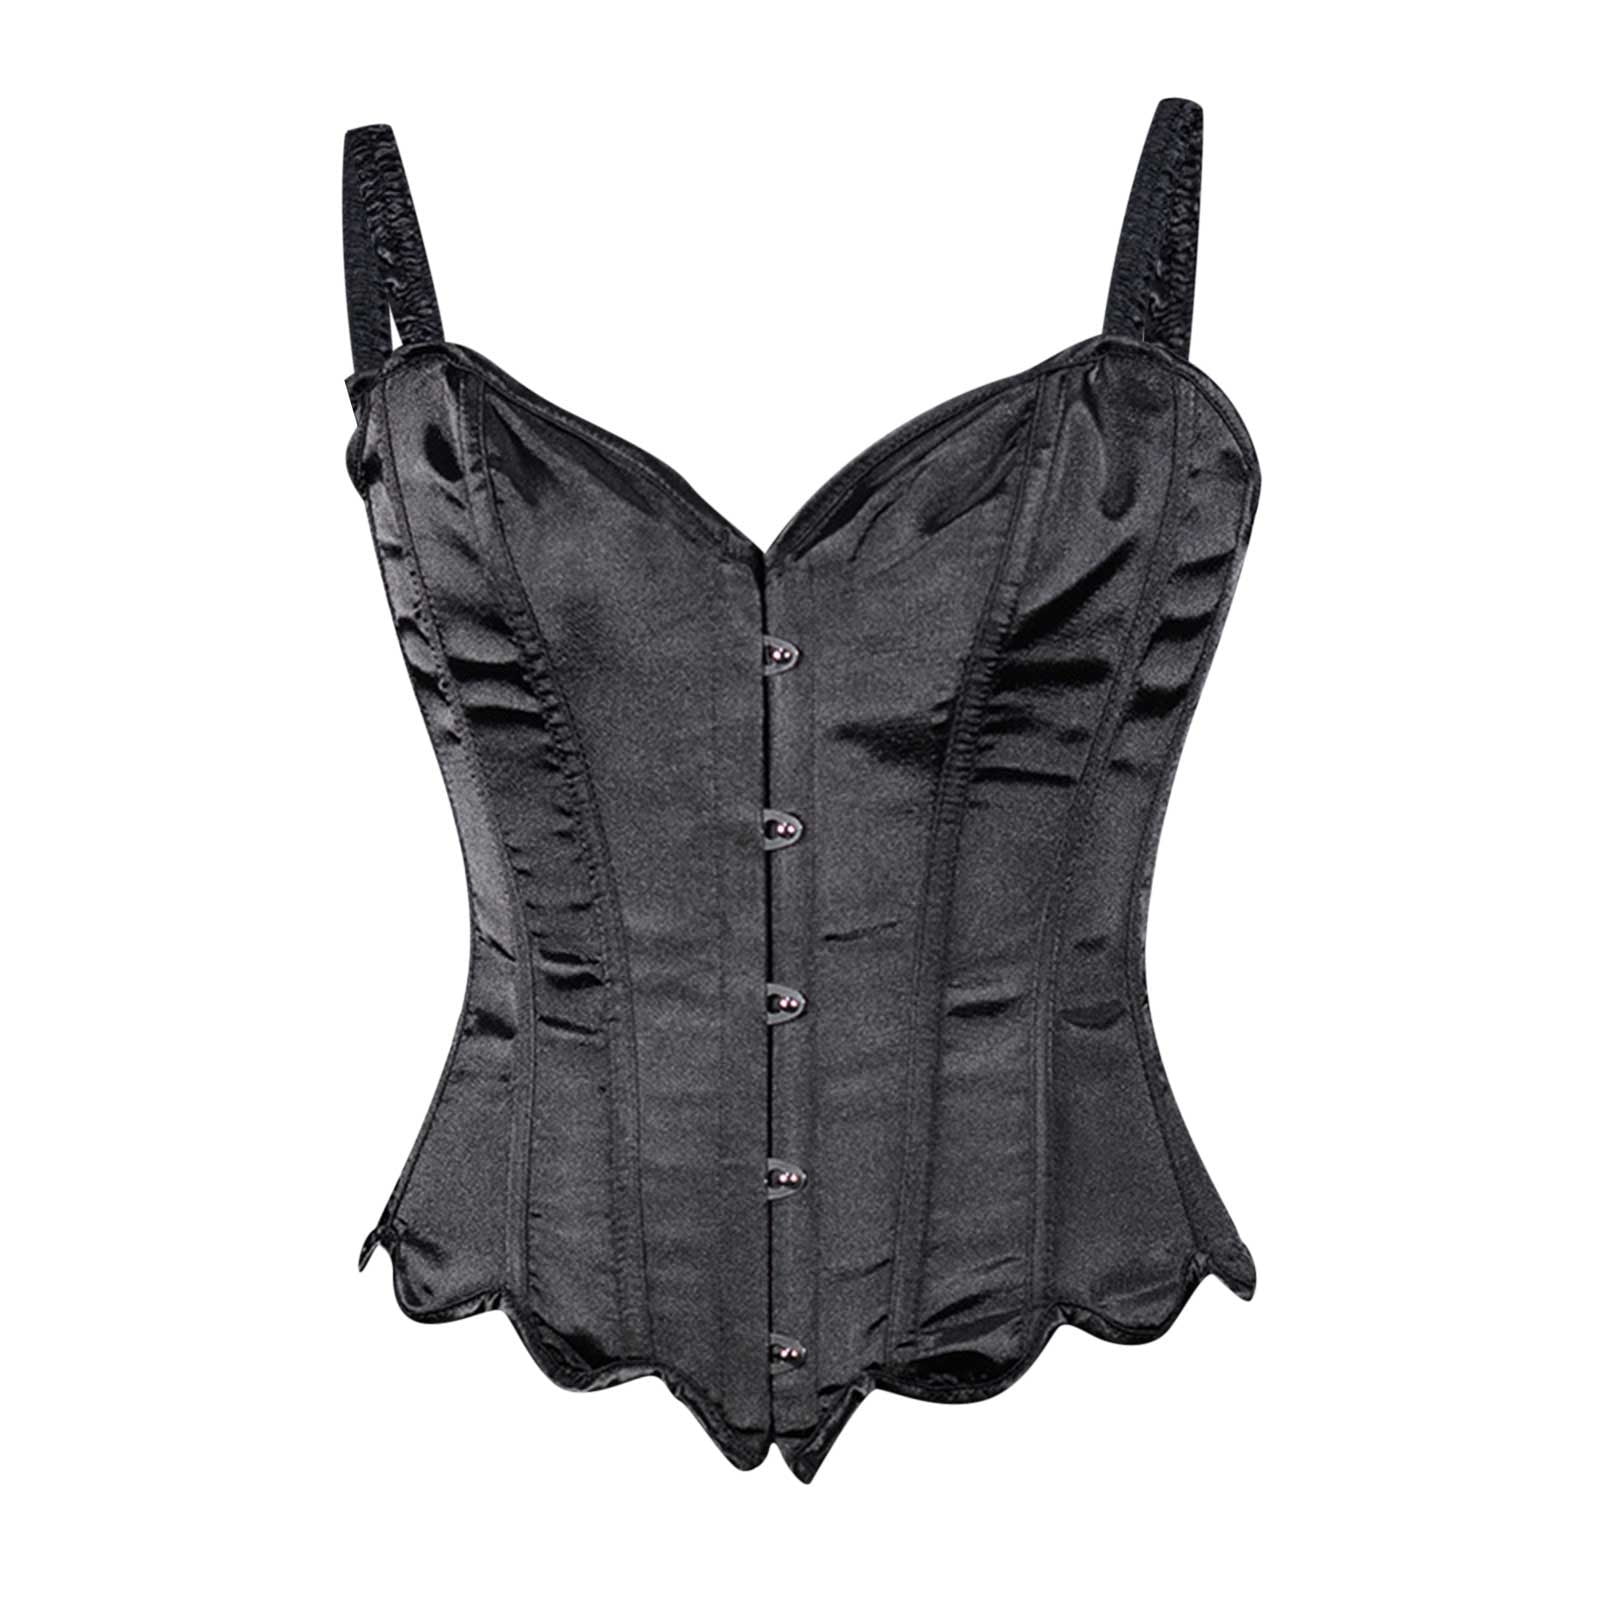 Plus Size Strappy Bustier, Corset Lingerie for Women, See Through